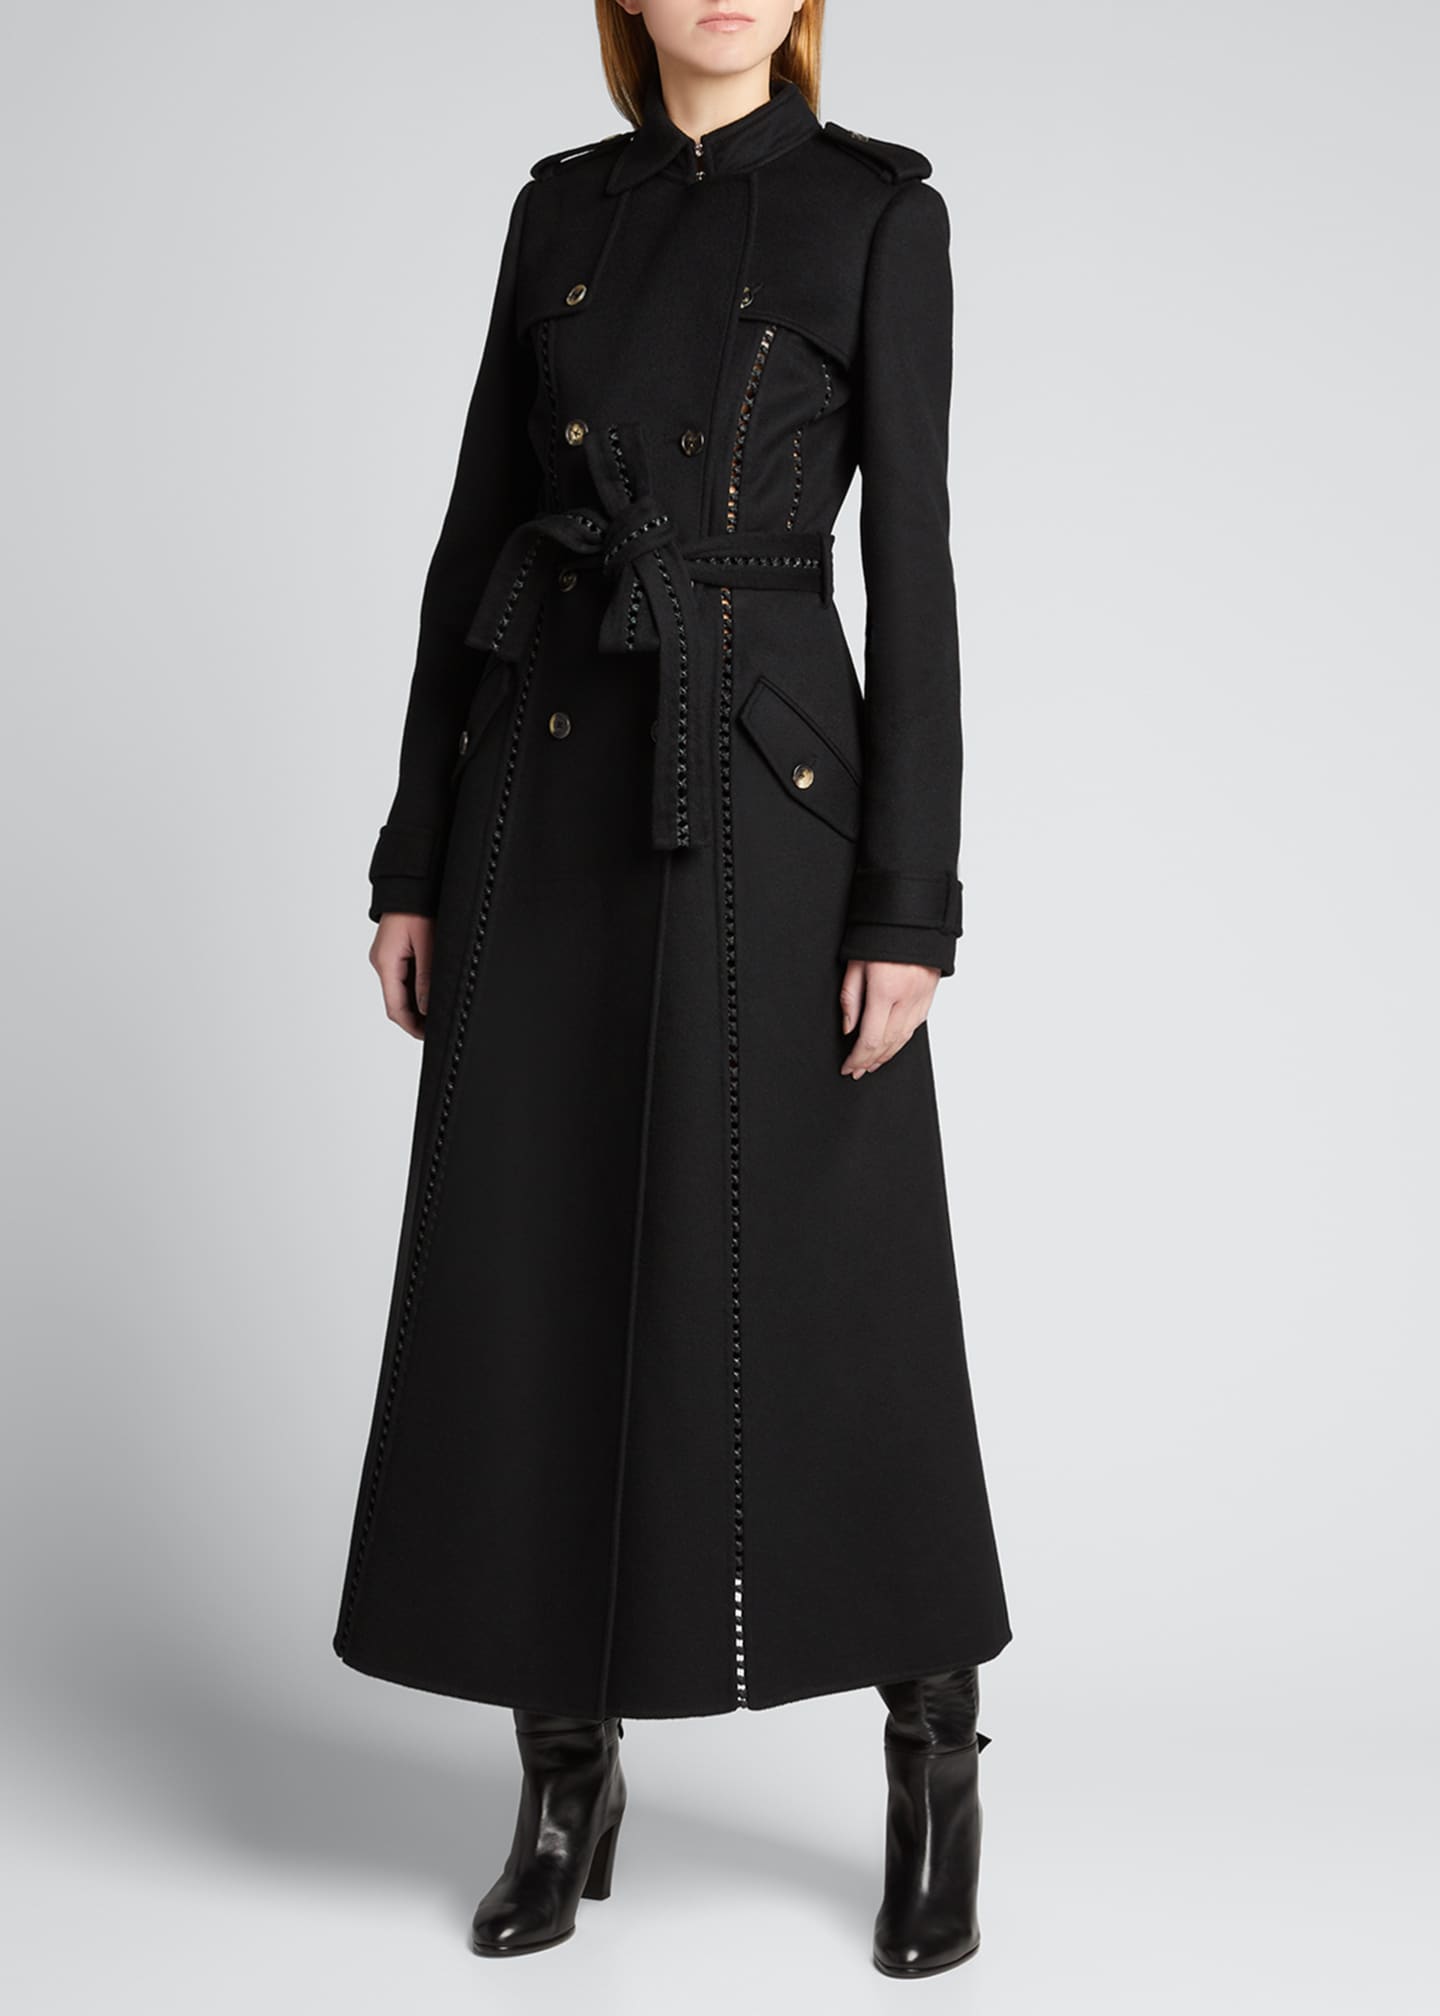 Gabriela Hearst Franz Knotted Cashmere Lace-Up Trench Coat - Bergdorf ...